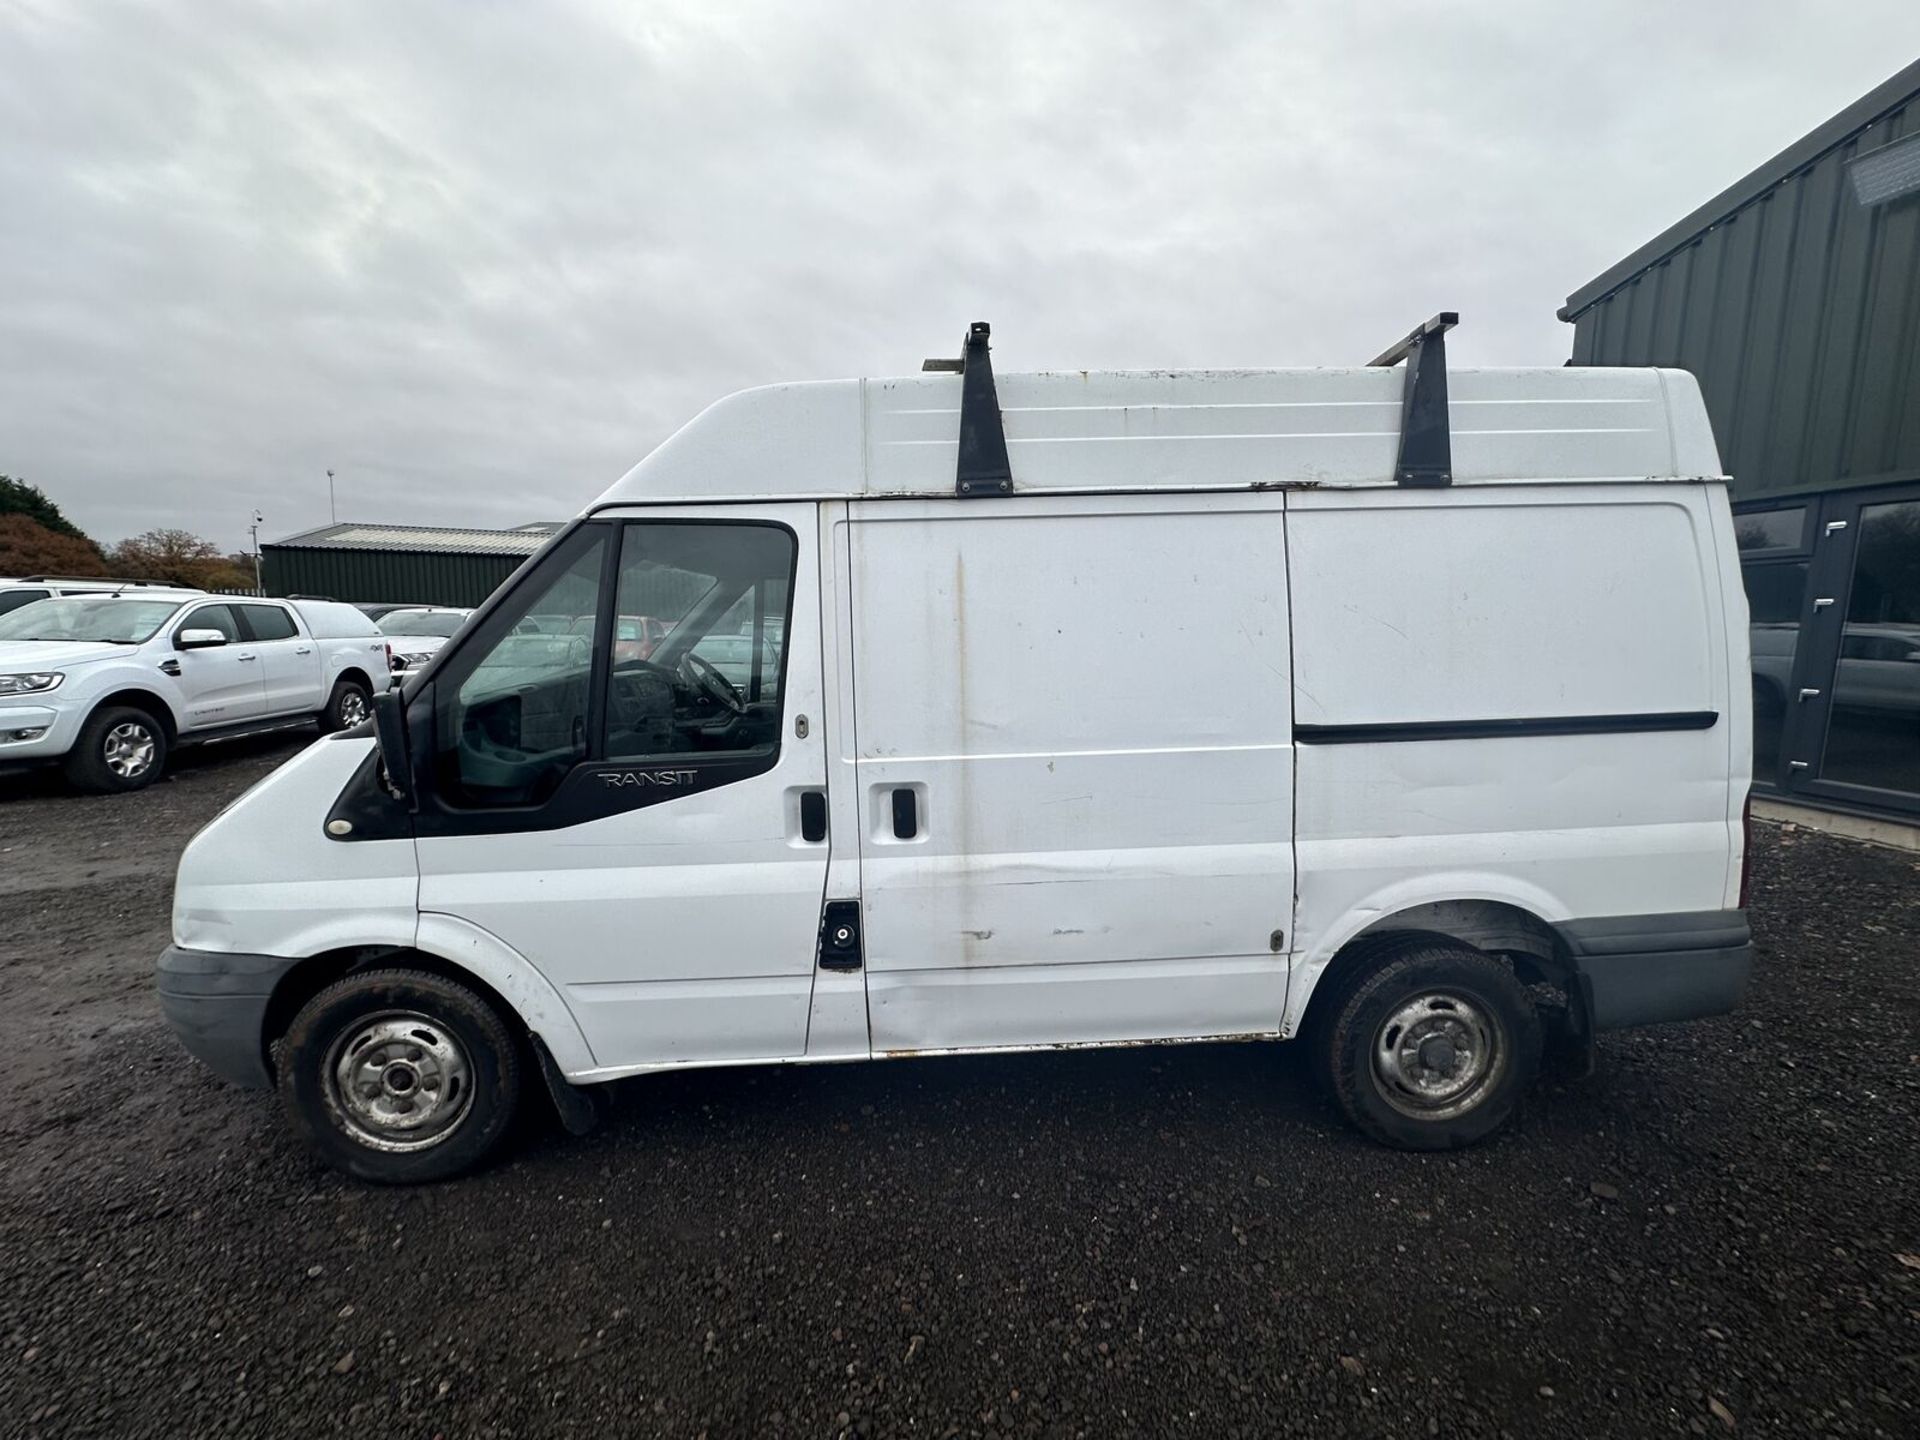 RELIABLE HAULING COMPANION: 60 PLATE FORD TRANSIT - NO VAT ON HAMMER